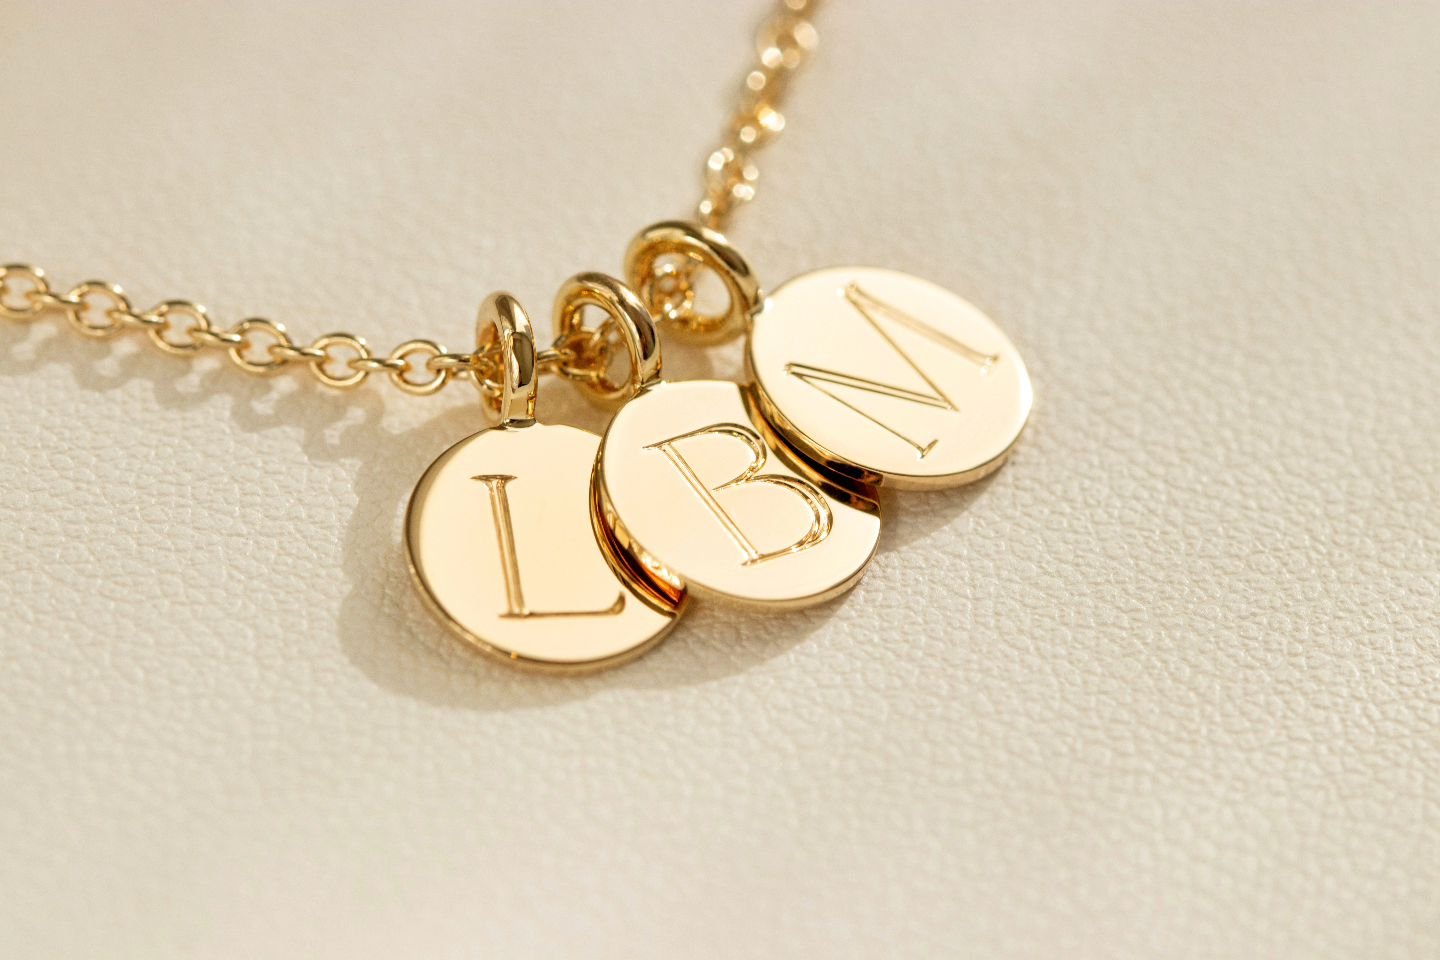 Jewellery has a beautiful way of holding special sentiment and connection. The creation of a heirloom pendant can be worn forever and kept close to the heart. Here we have a bespoke pendant design in yellow gold that has been lovingly hand-engraved b